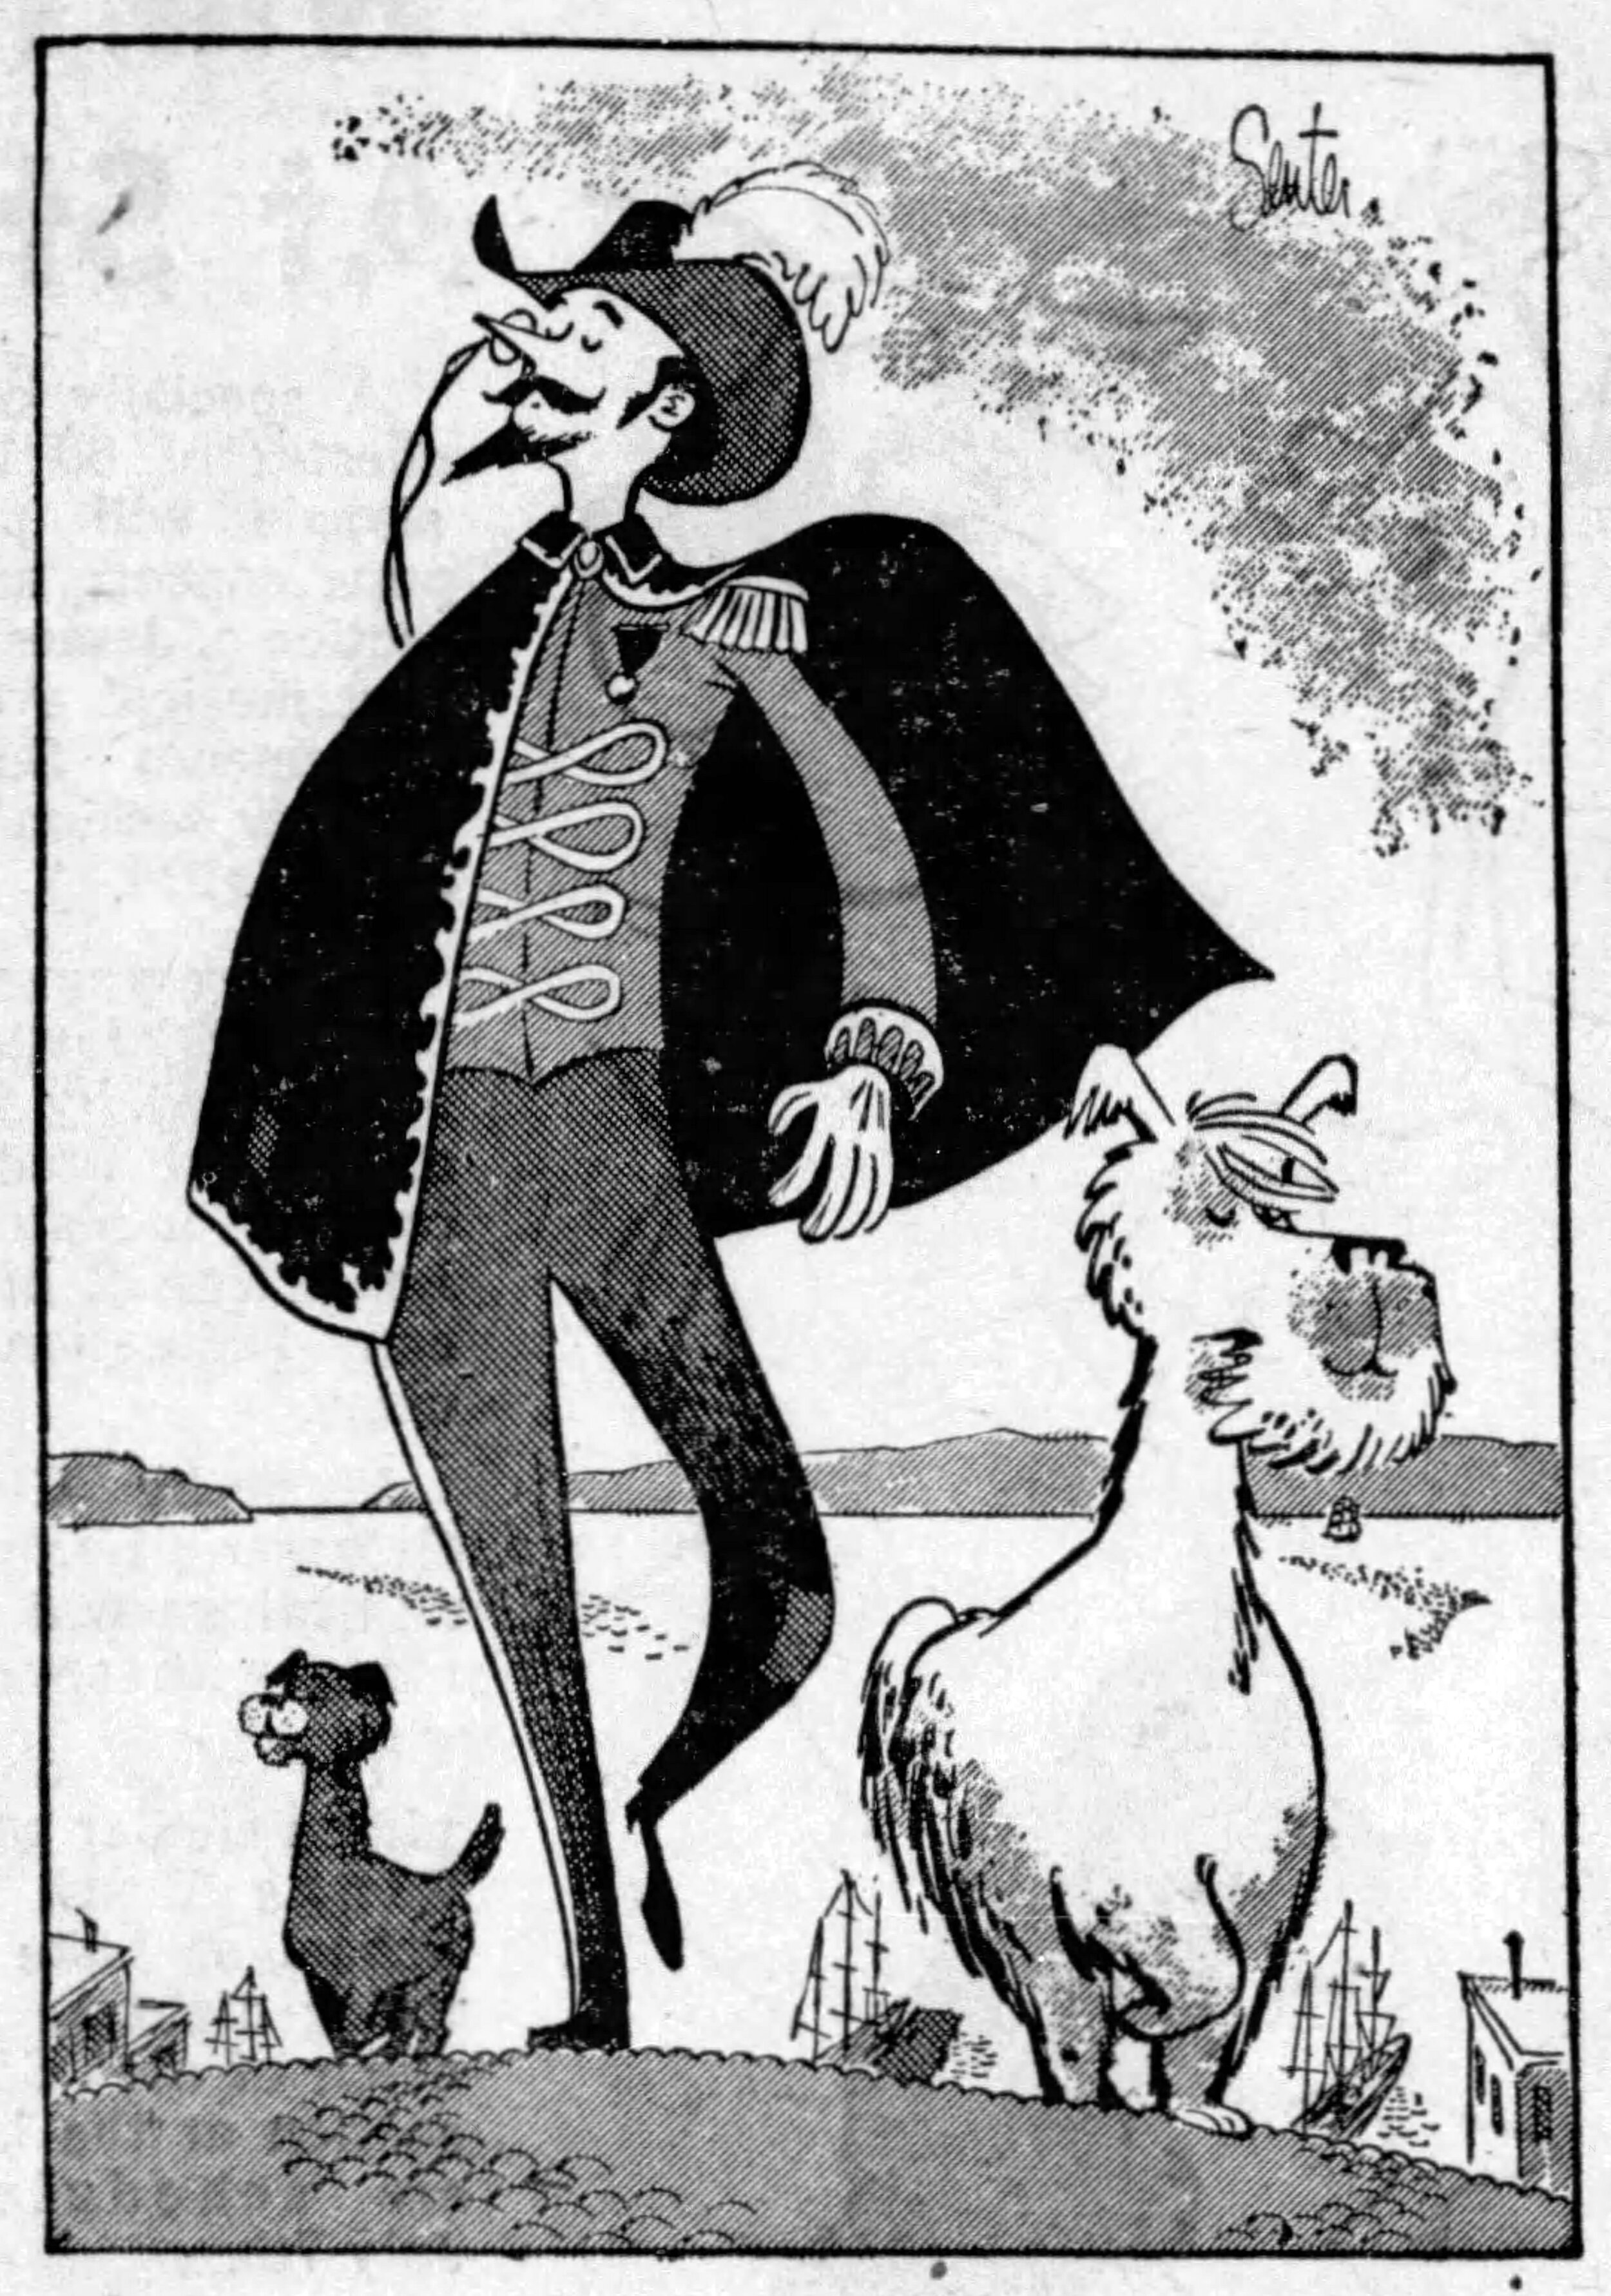   Emperor Norton with Bummer and Lazarus, 1958 , by “Senter.” This illustration accompanied Joe Smith’s Tales of the Sierra column, “Bummer and Lazarus Were Inseparable Pals,”  Sacramento Bee , 21 June 1958, p. 37. Source: Newspapers.com [Added 10.12